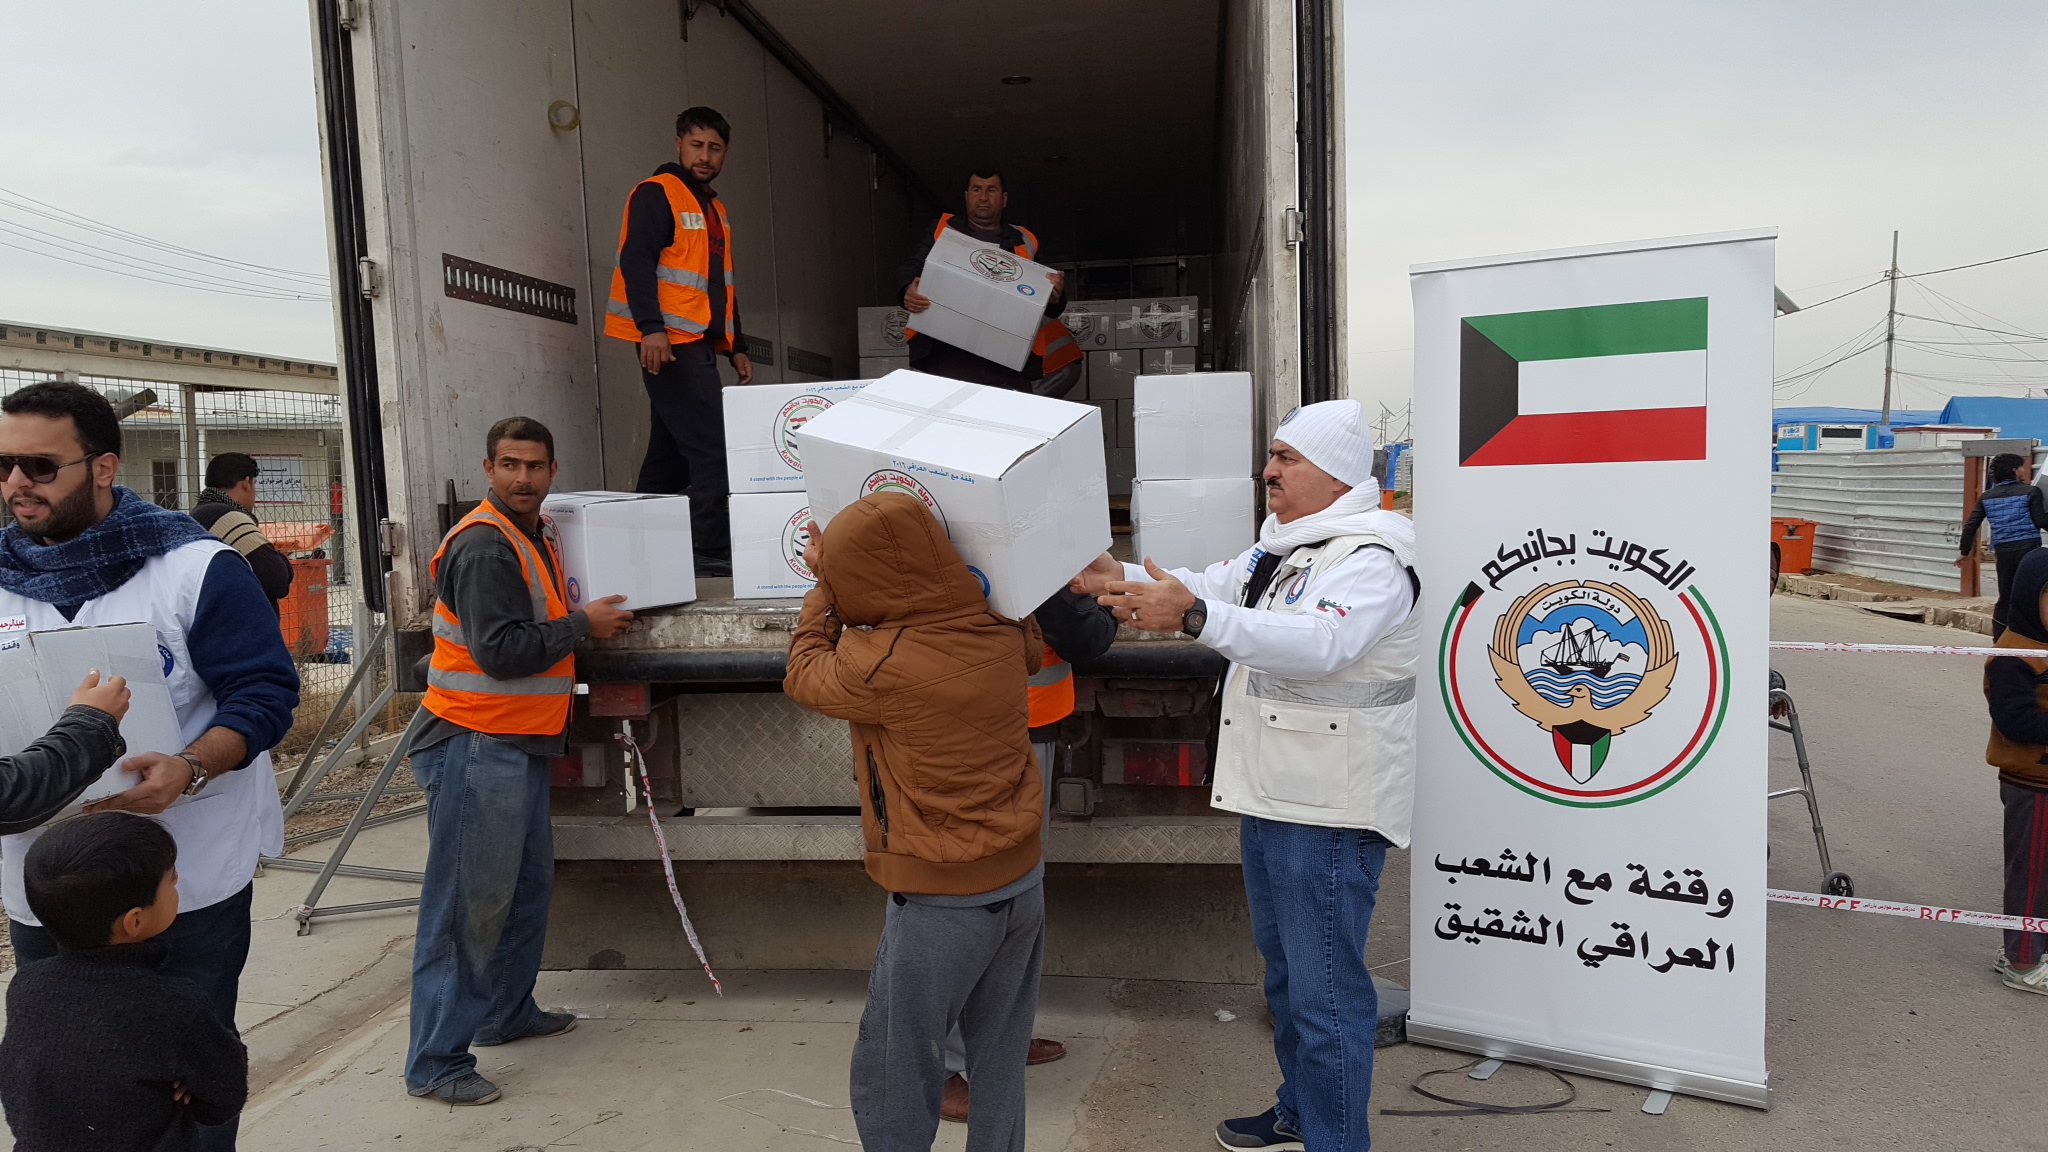 Kuwait Red Crescent Society delivers food baskets to displaced Iraqis in Irbil